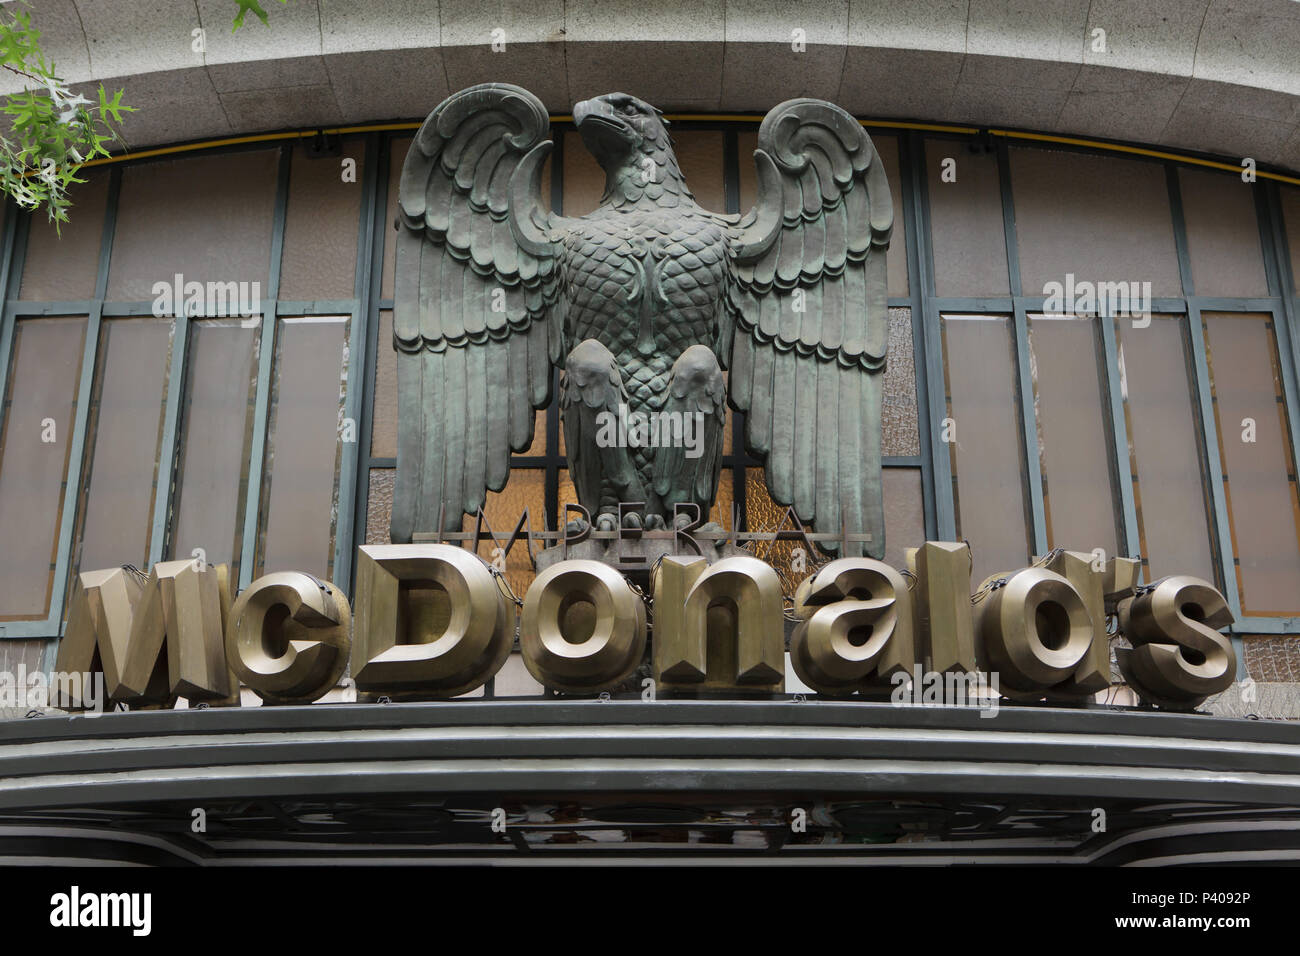 Bronze eagle over the McDonald's restaurant sign on the building of the former Imperial Café in Porto, Portugal. The emblematic historic building from the 1930s in the Praça da Liberdade is now known as the most beautiful McDonald's restaurant in the world. Stock Photo